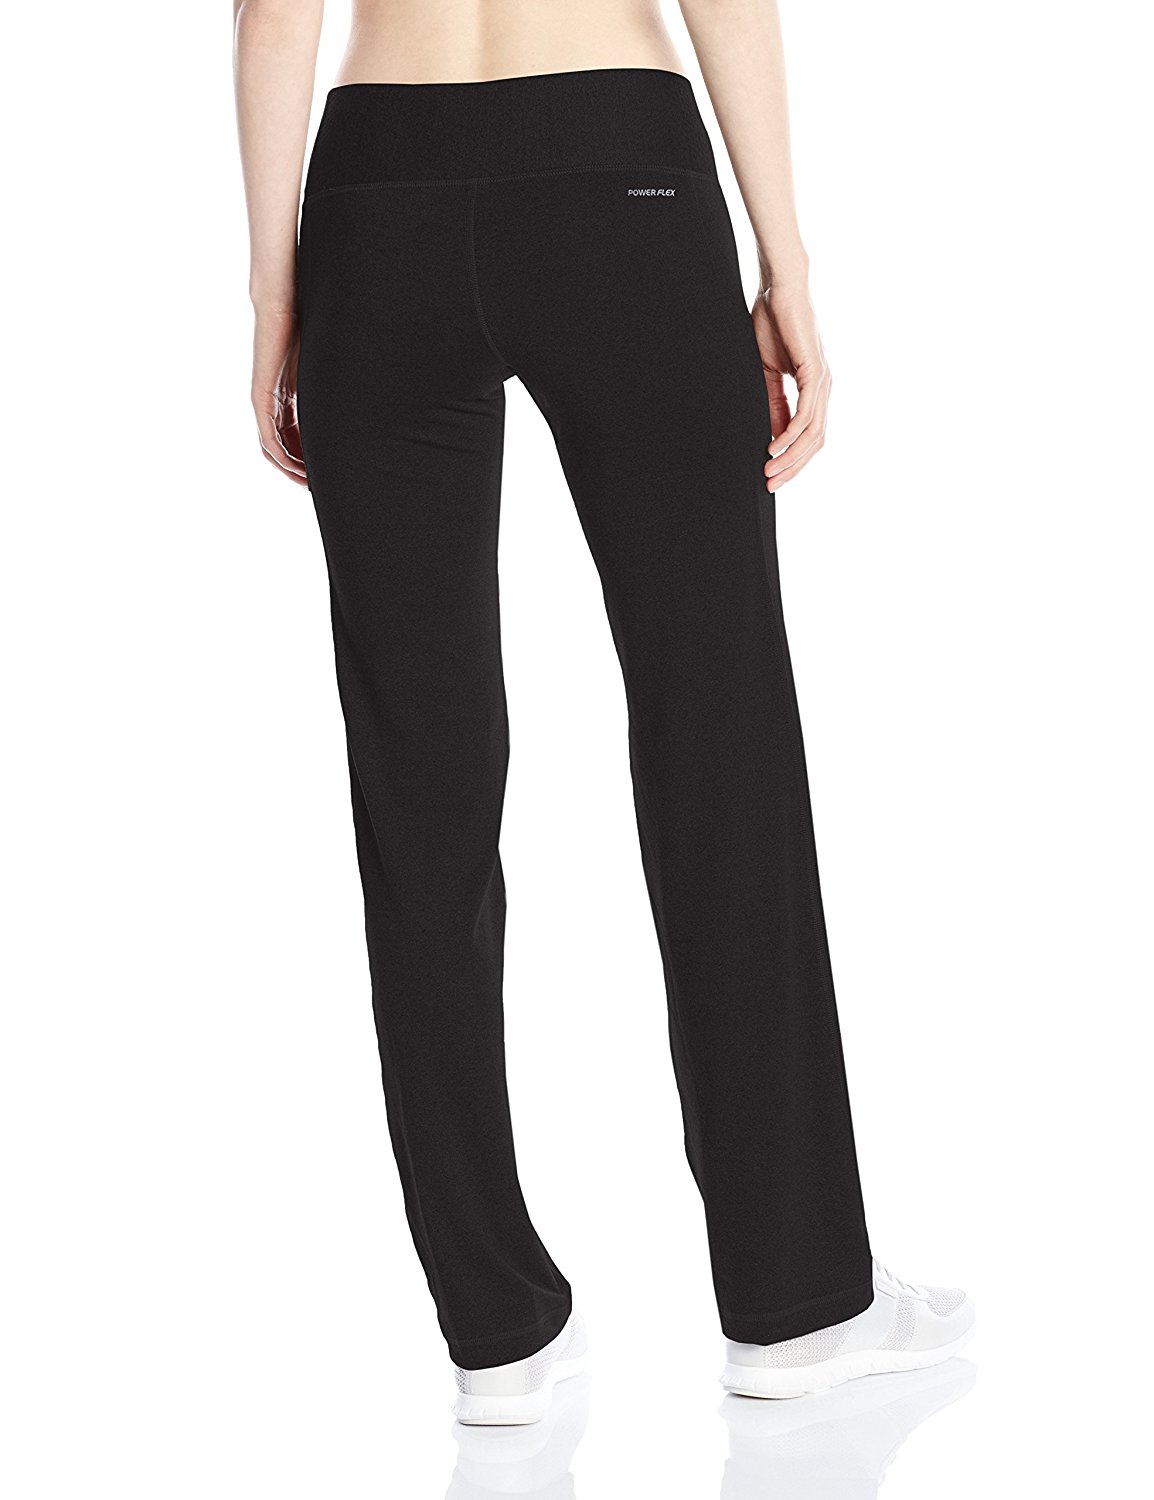 Champion Women's Absolute Semi-Fit Pant with SmoothTec, Black, Size ...